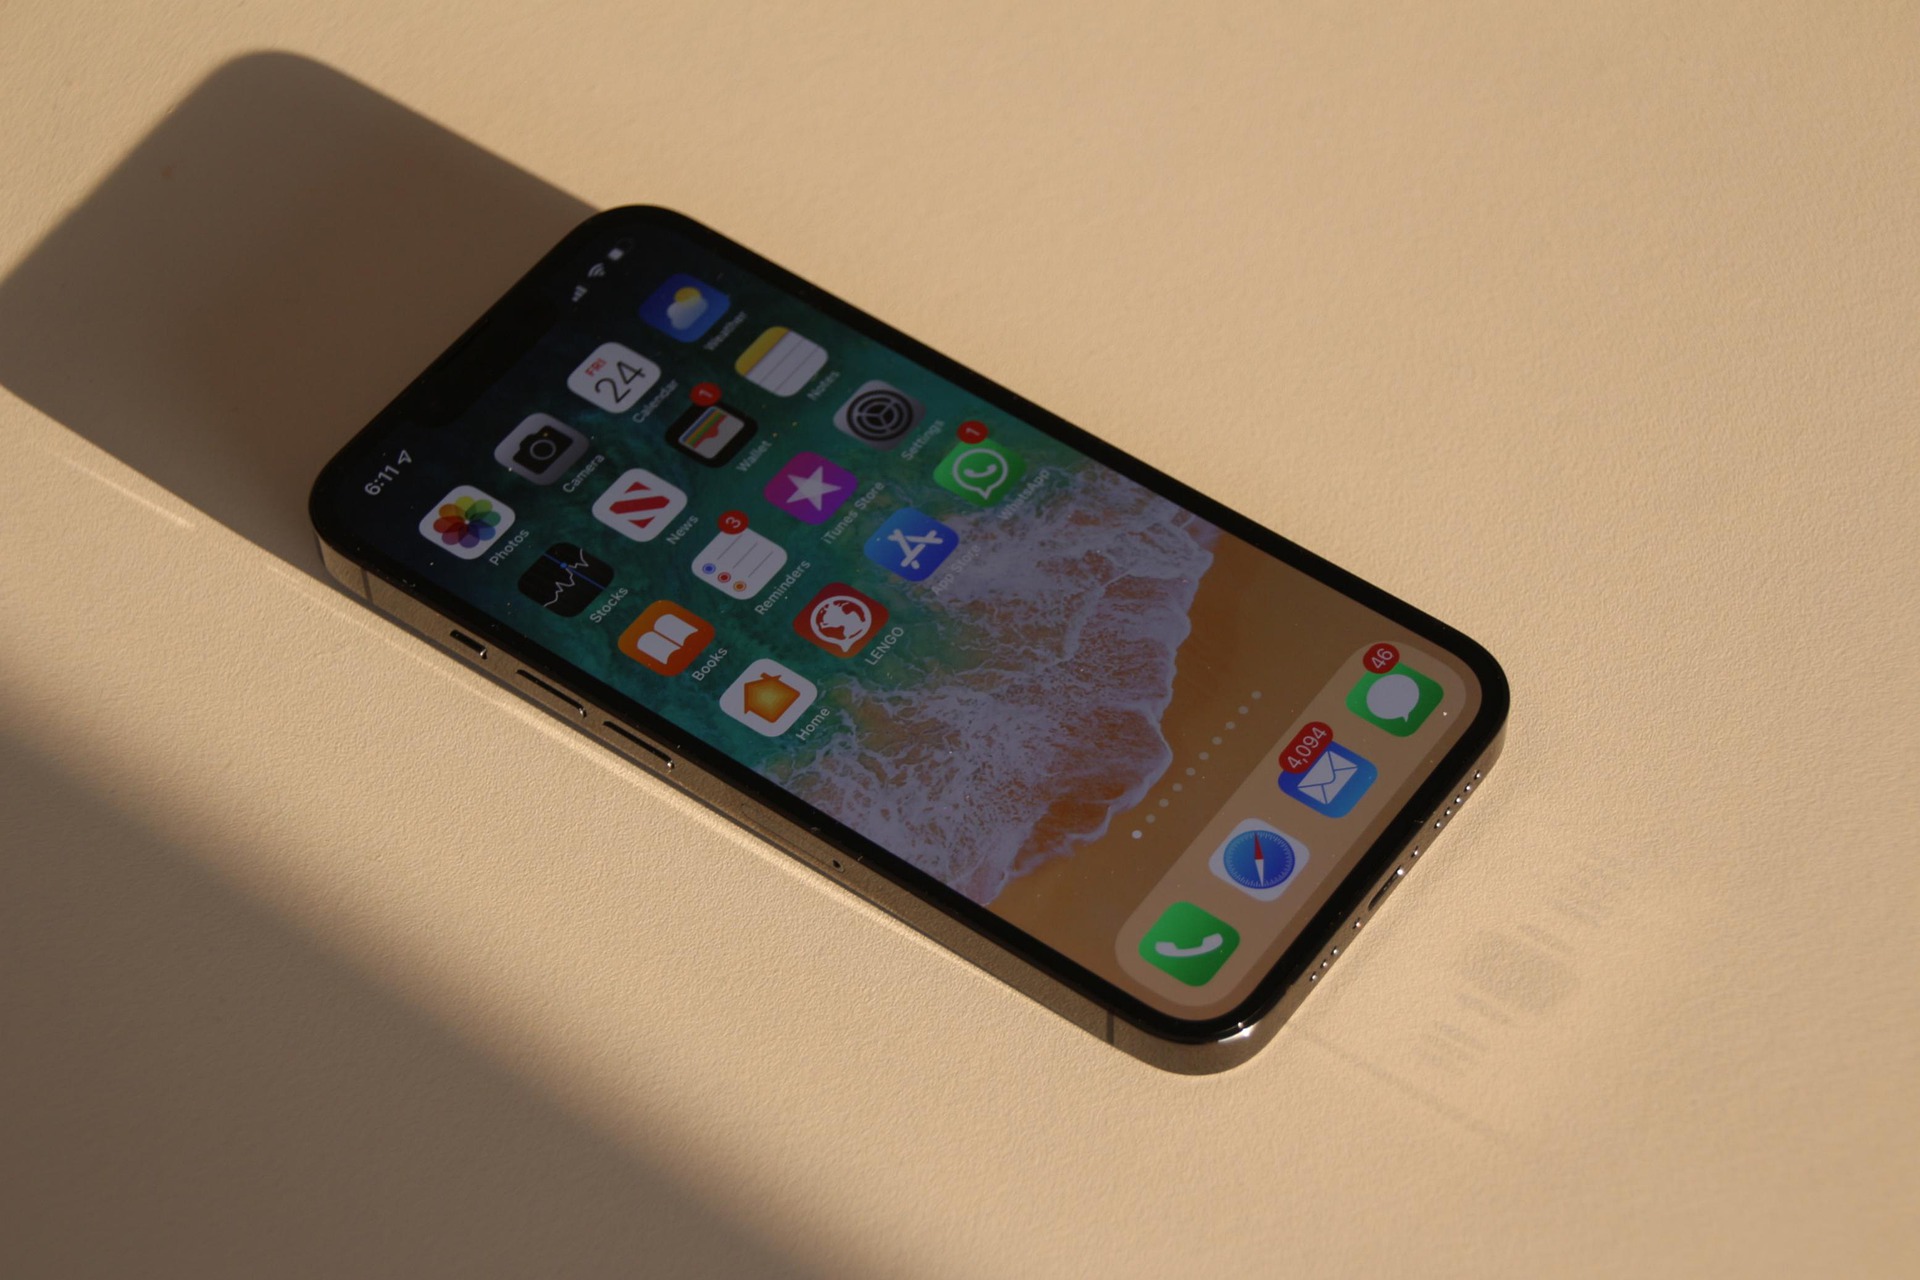 Apple Leads Top 10 Smartphone List for April 2022, Samsung Follows